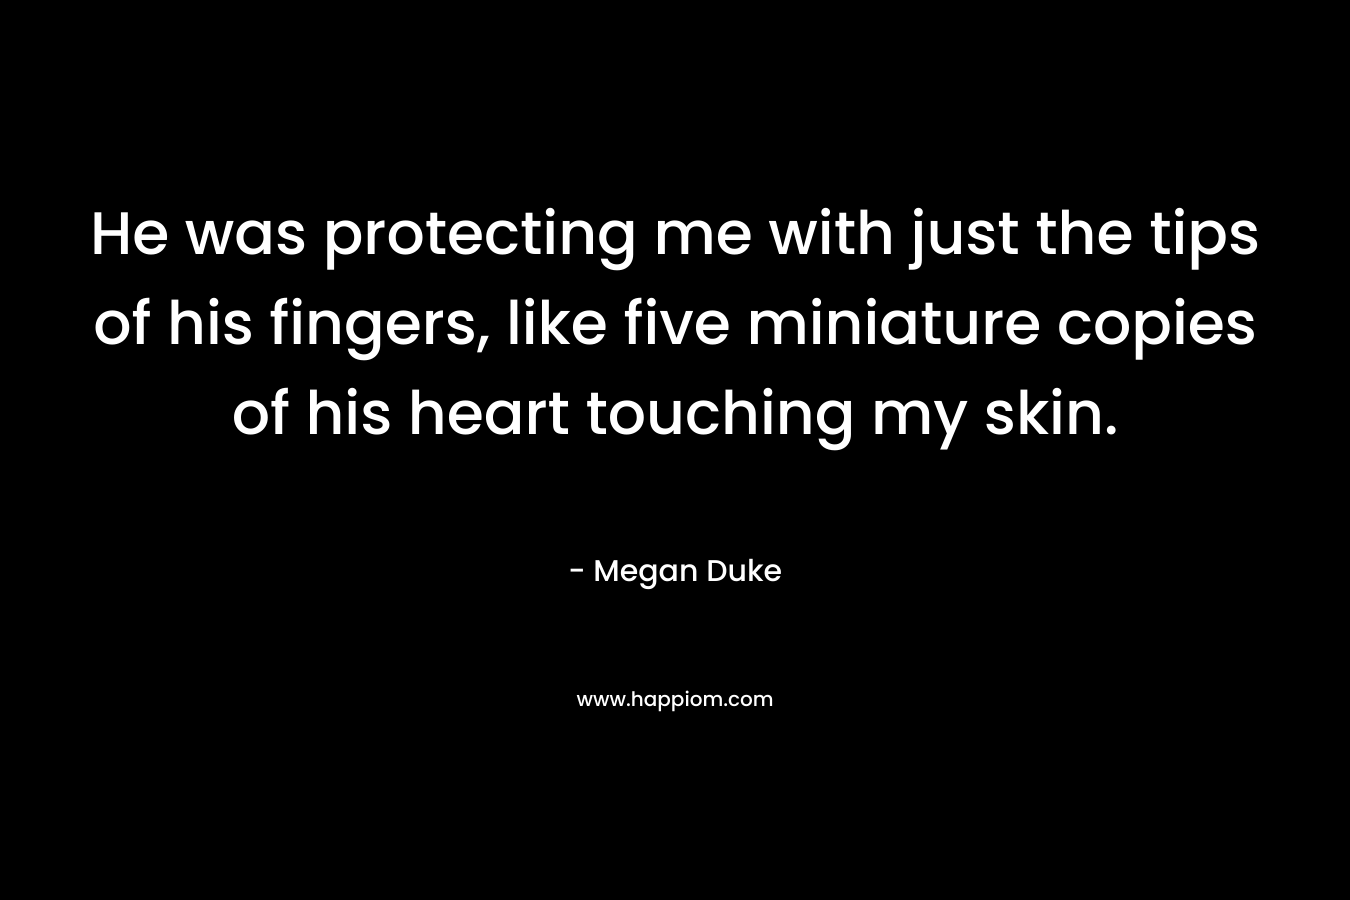 He was protecting me with just the tips of his fingers, like five miniature copies of his heart touching my skin. – Megan Duke